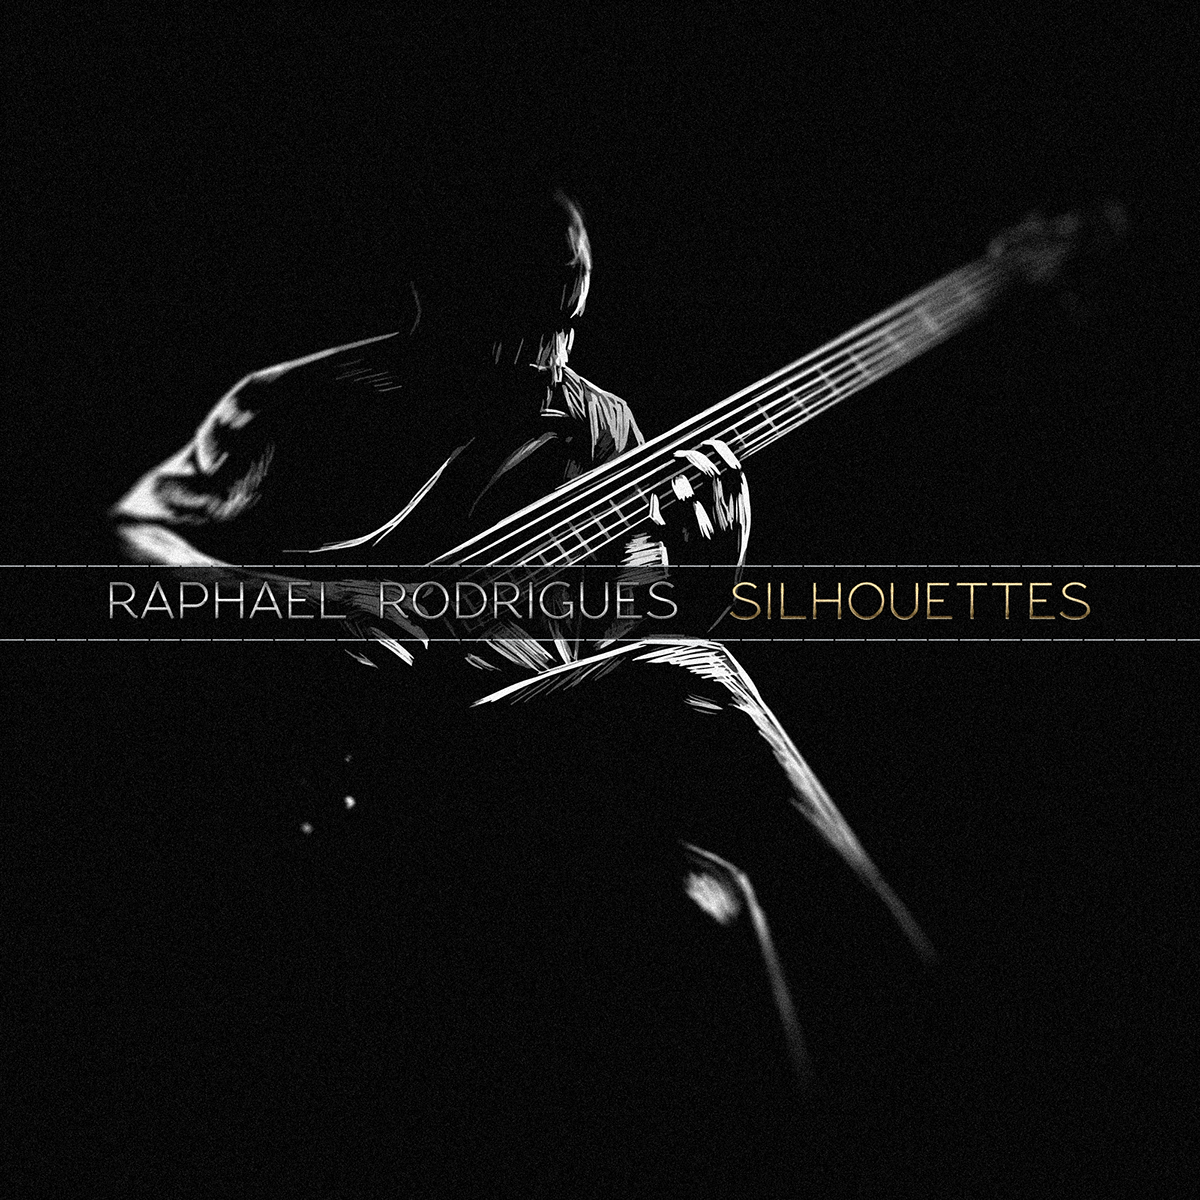 raphael Rodrigues Silhouettes solo bass Album cover night darkness feelings